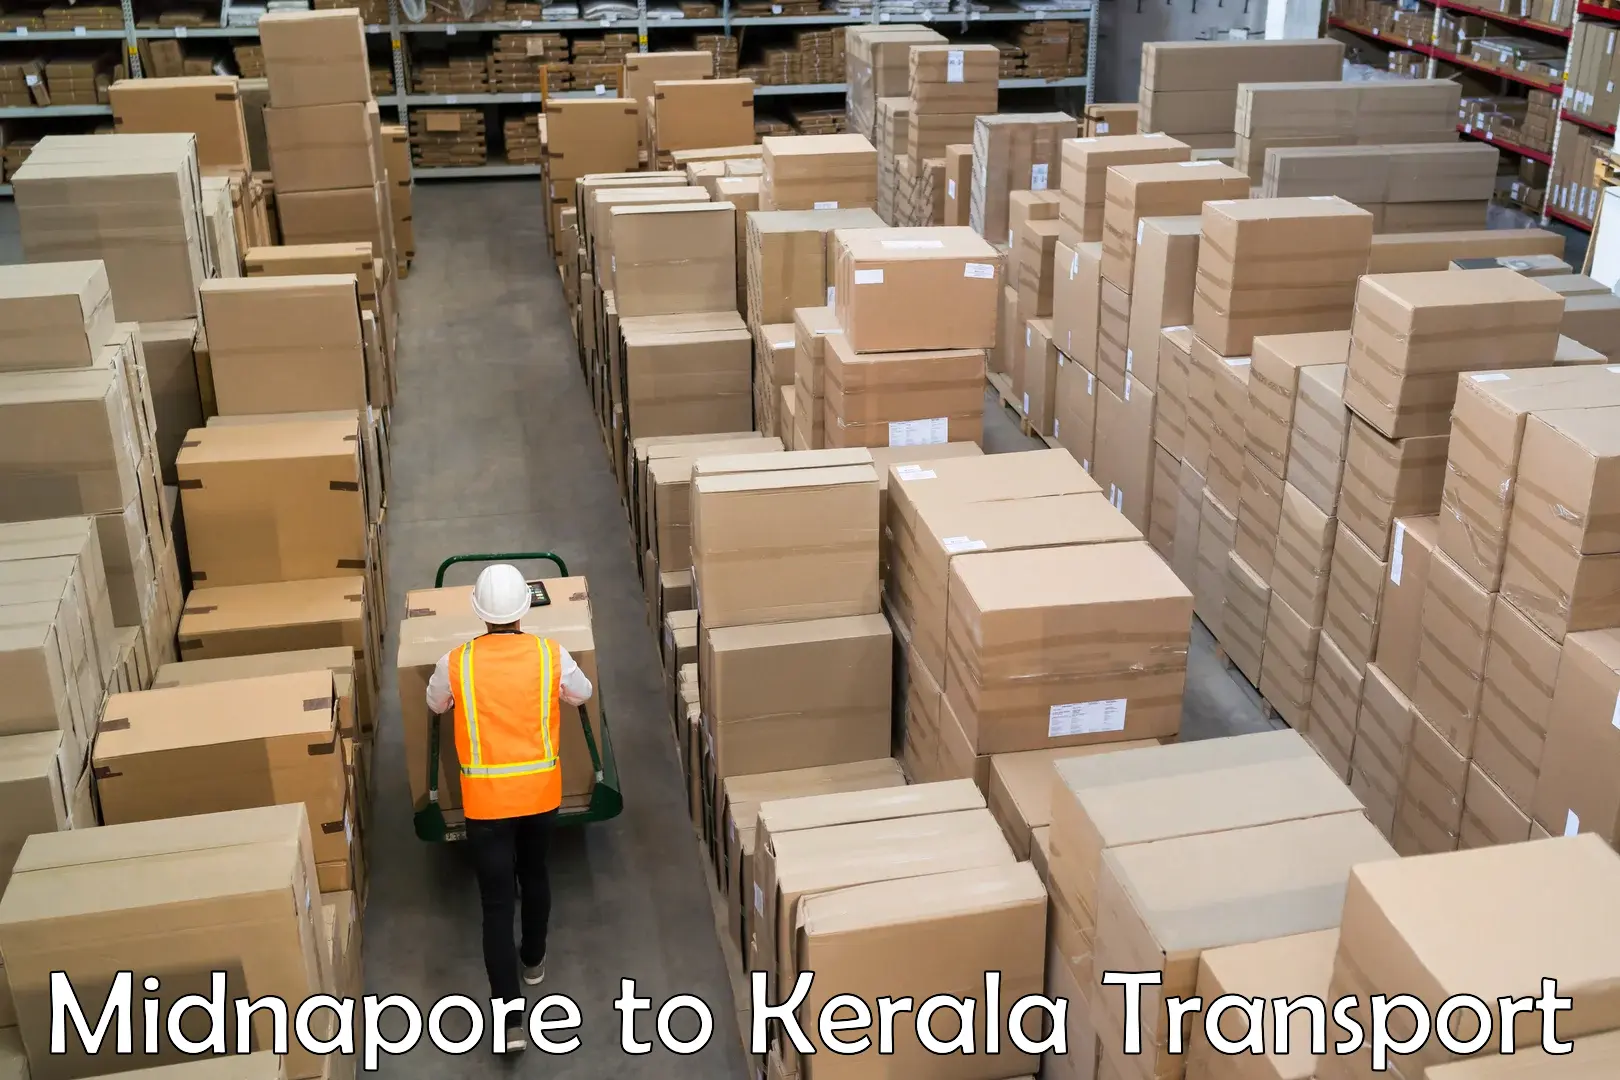 Road transport services Midnapore to Kozhikode